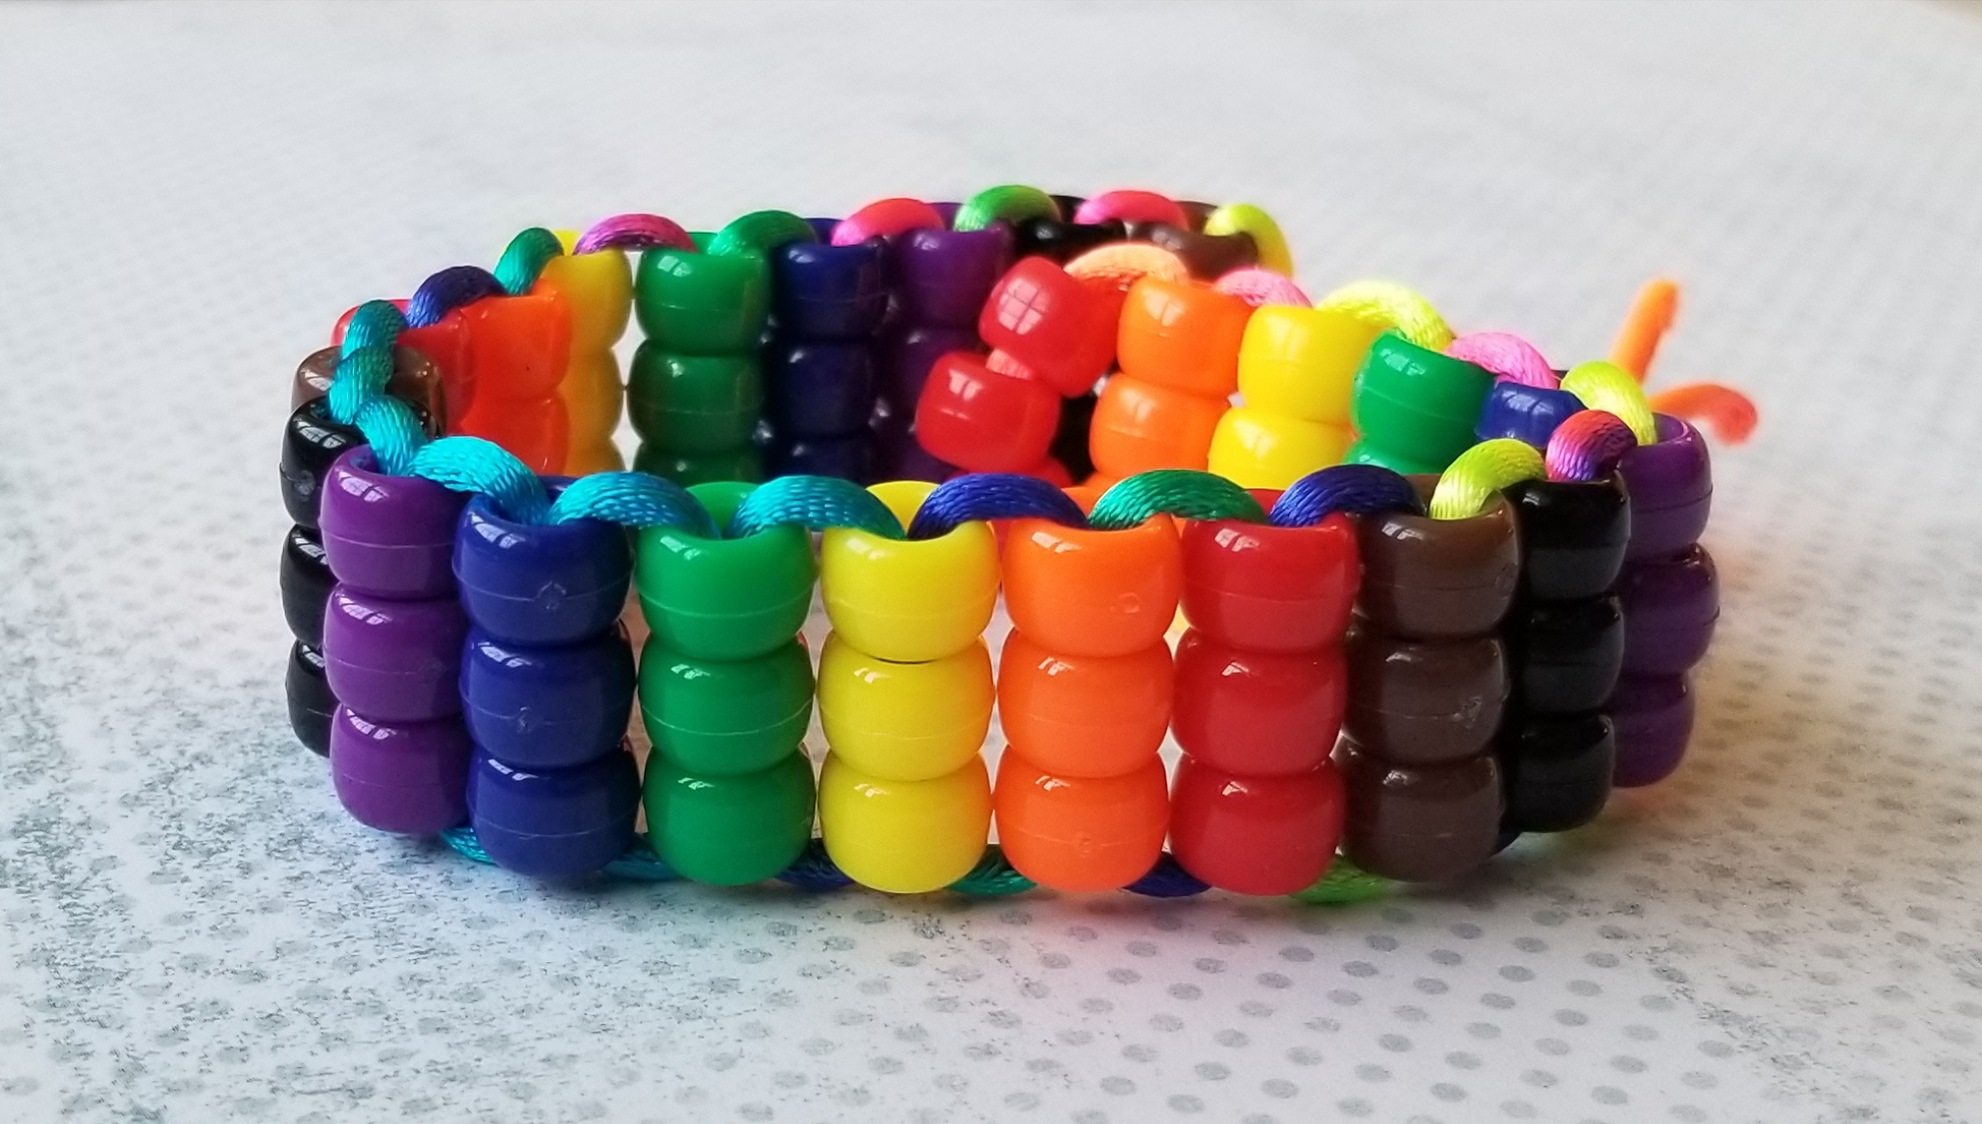 A bracelet made of pony beads in black, brown, red, orange, yellow, green, blue, and purple beads